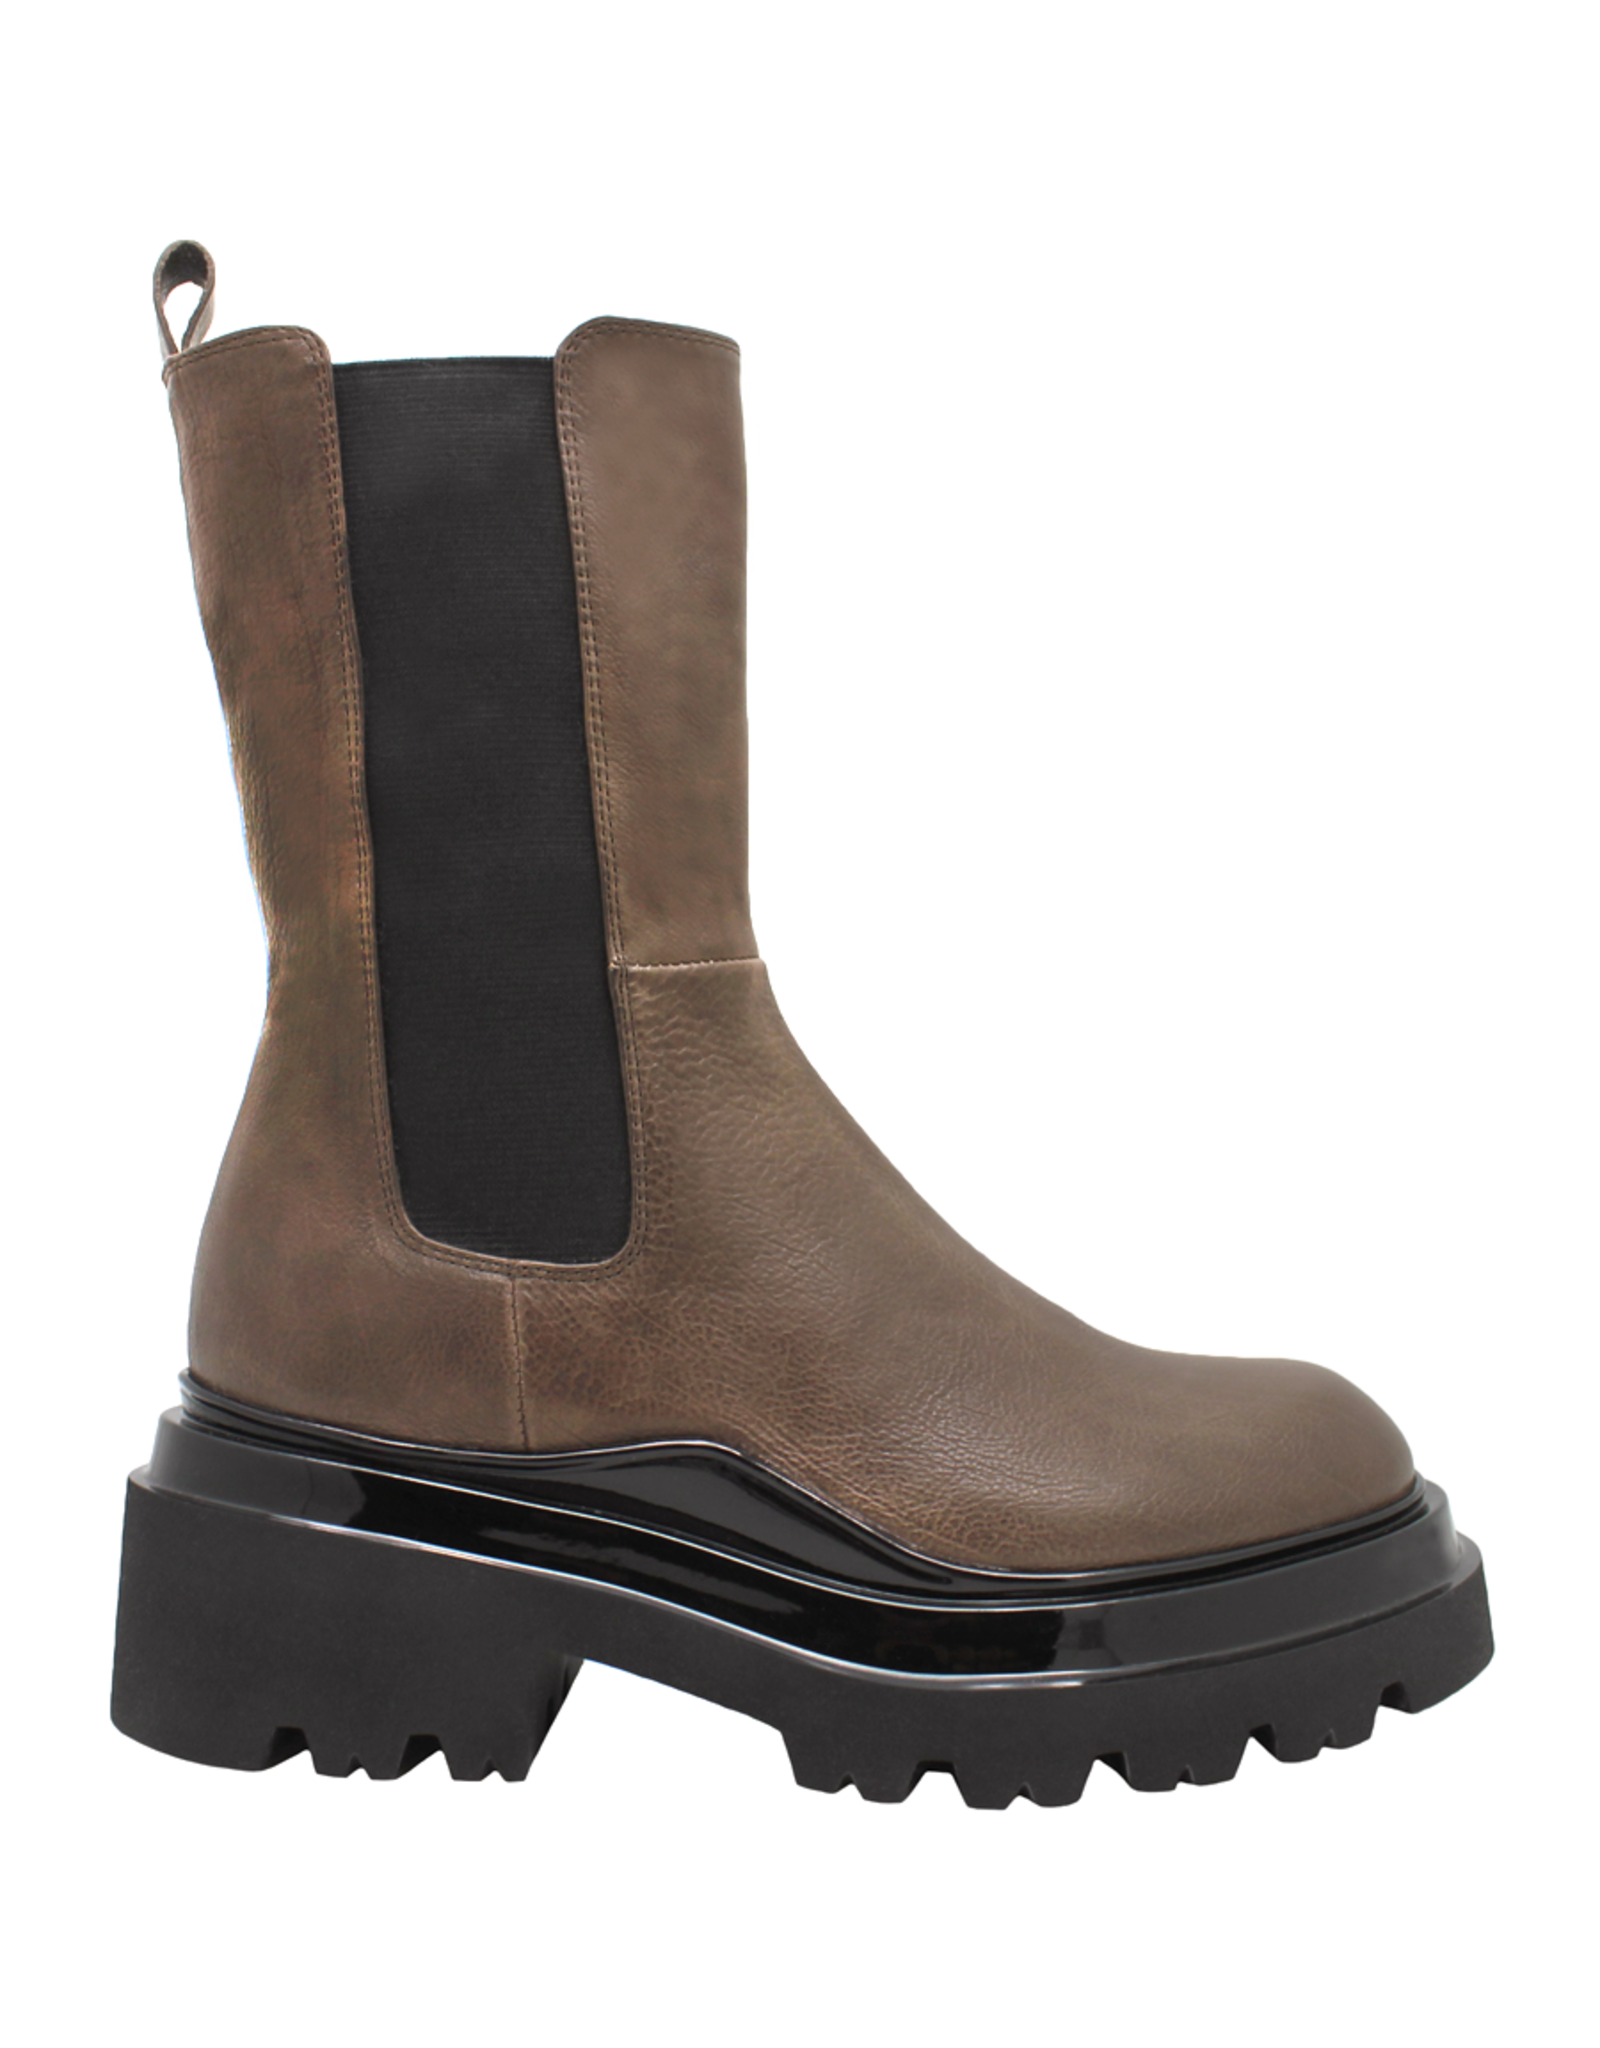 Now Now Brown Mid-Calf Chelsea Lug Sole 7117